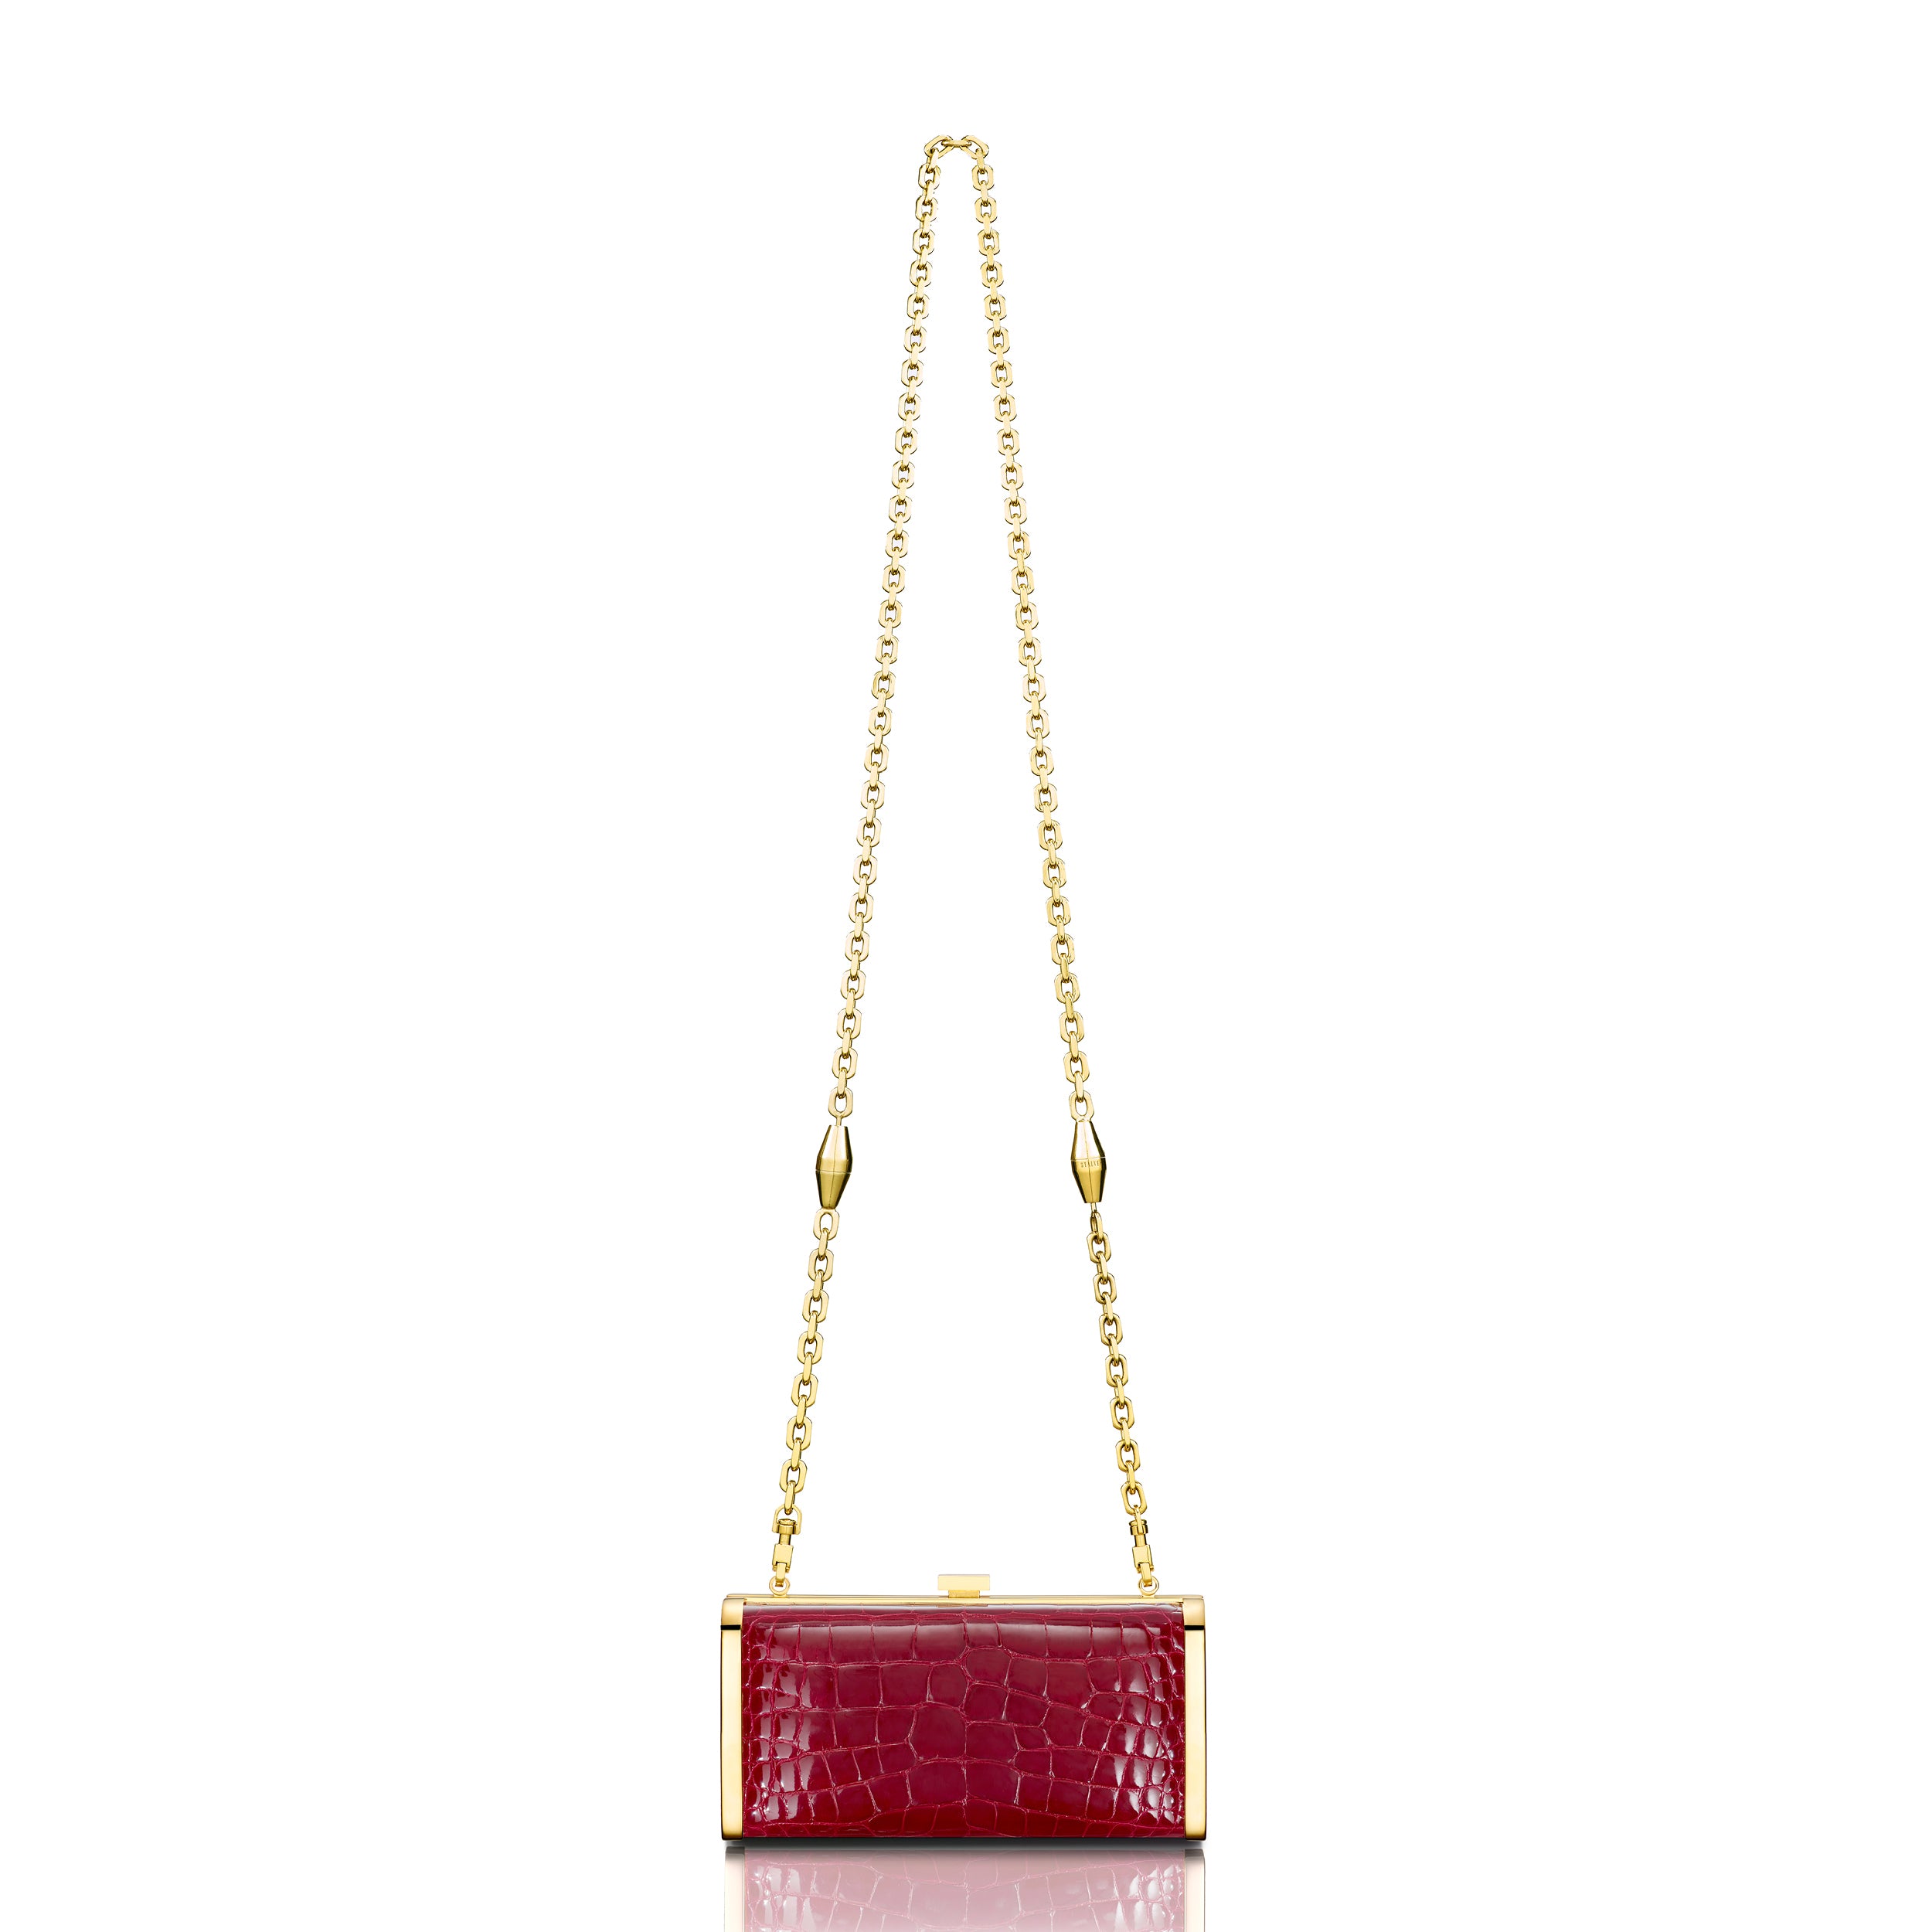 STALVEY Square Clutch in Burgundy Alligator with 24kt Gold Hardware Back View with Chain